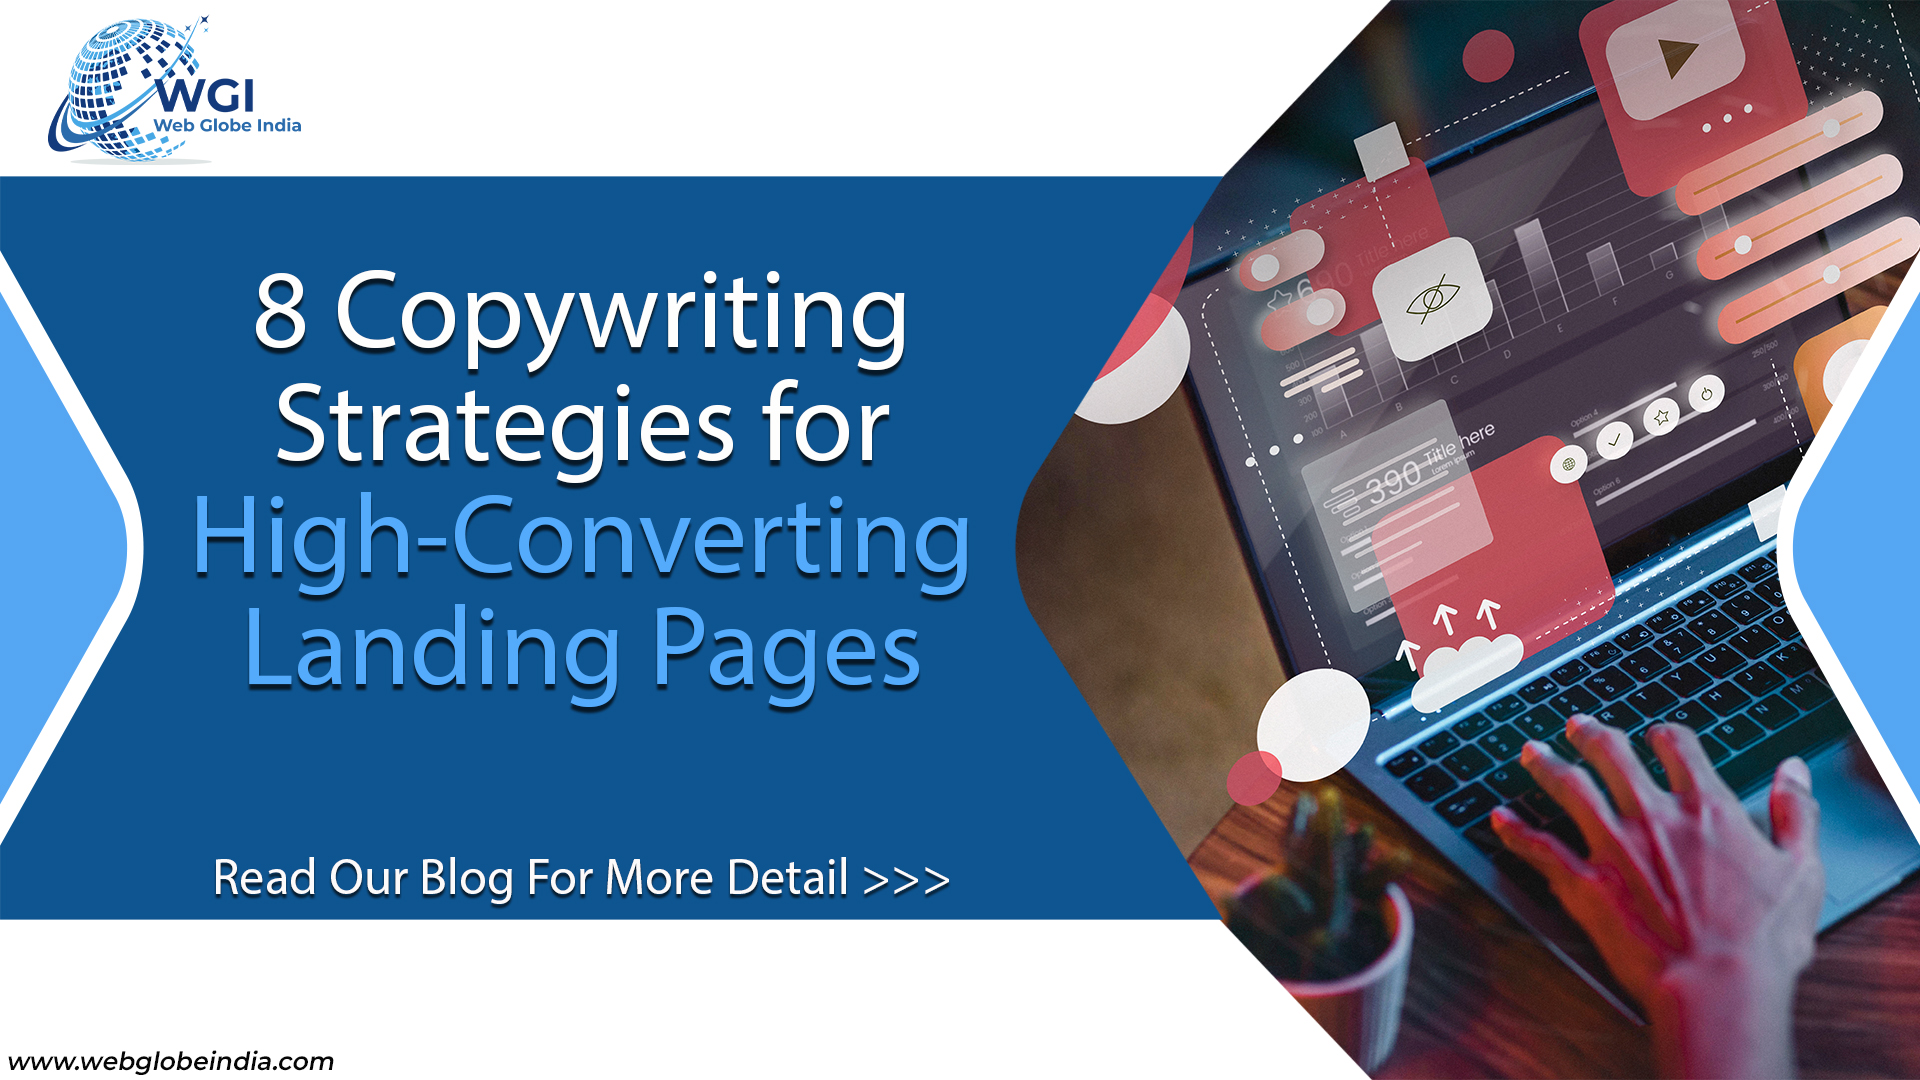 8 Copywriting Strategies for High Converting Landing Pages